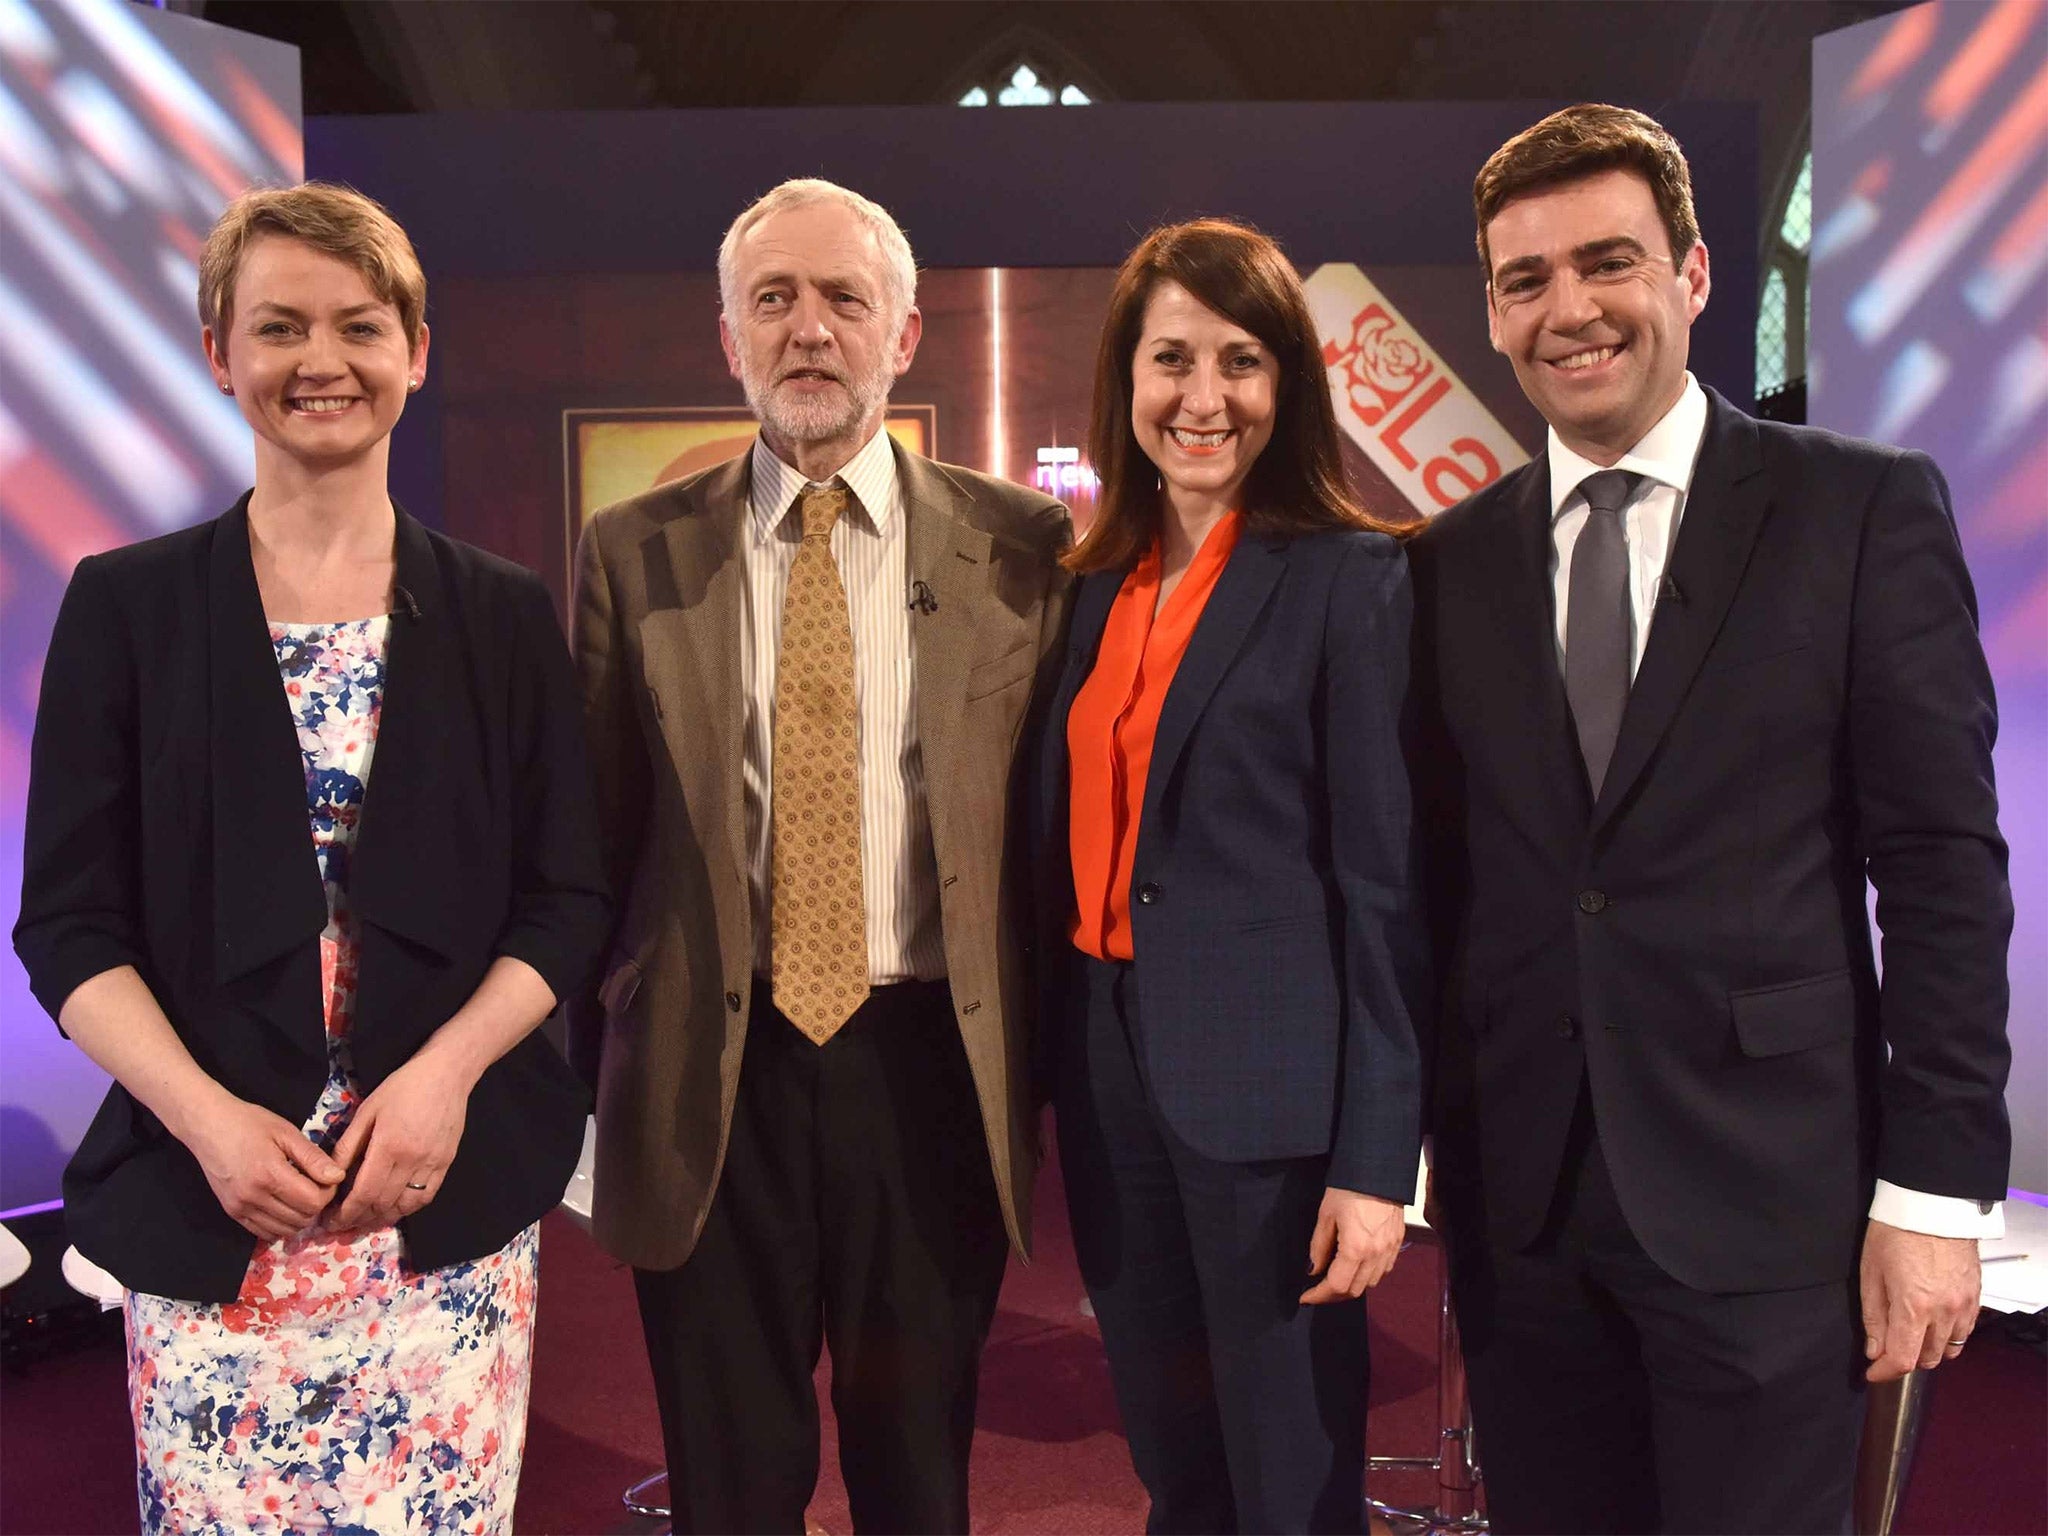 Mr Corbyn is second only to Andy Burnham out of the four leadership candidates for CLP nominations so far